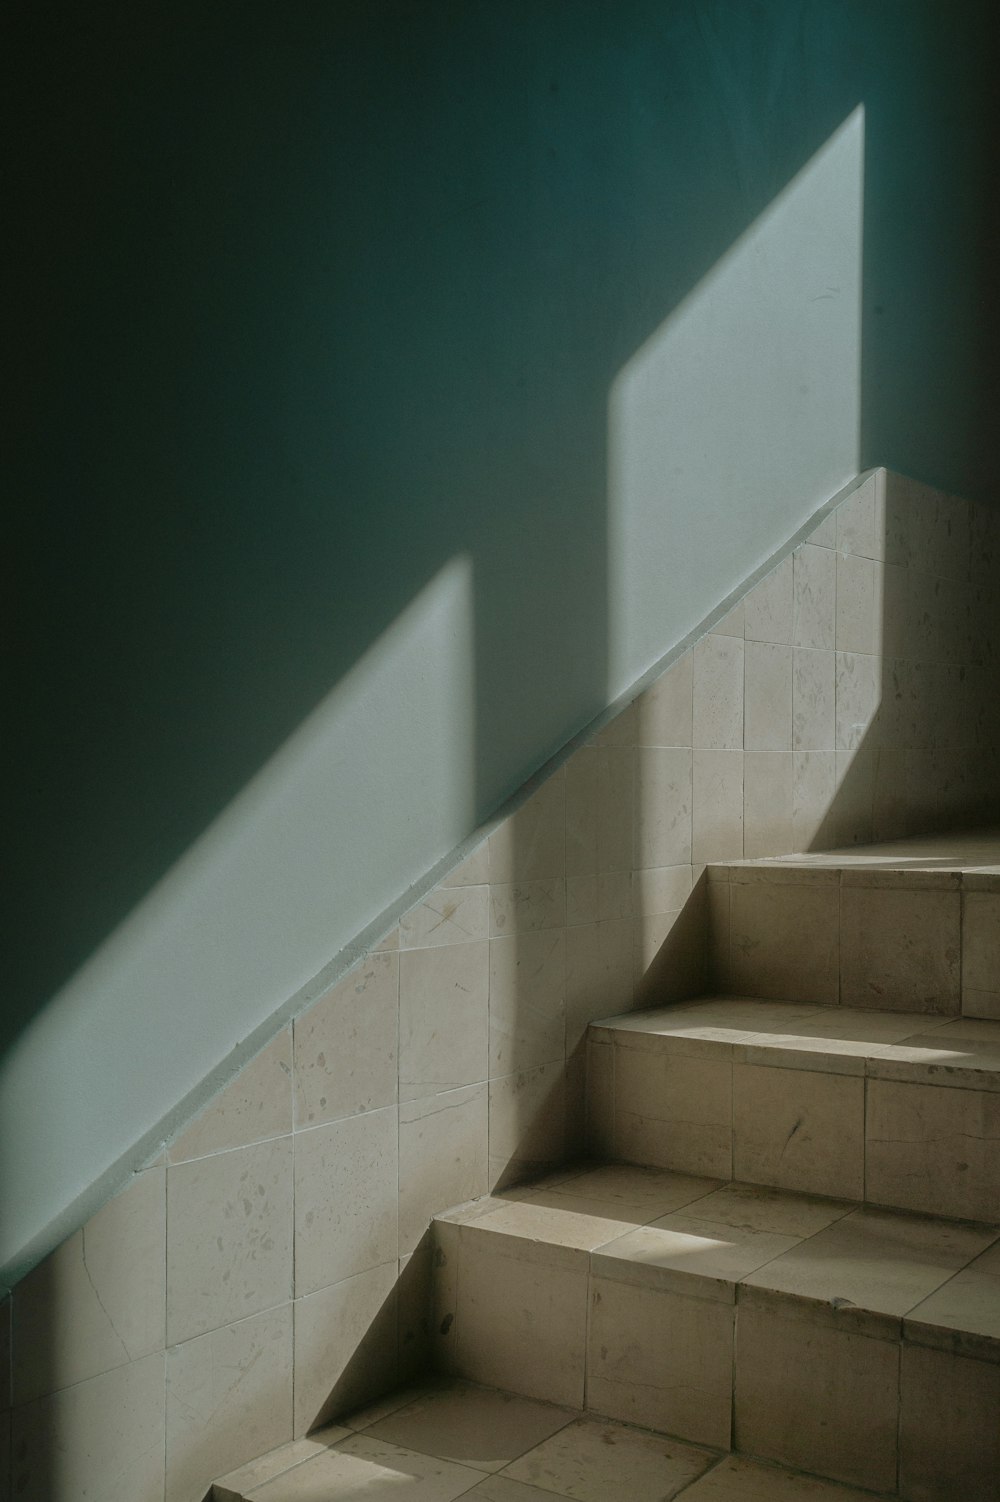 a stair case in a room with a light coming through the window